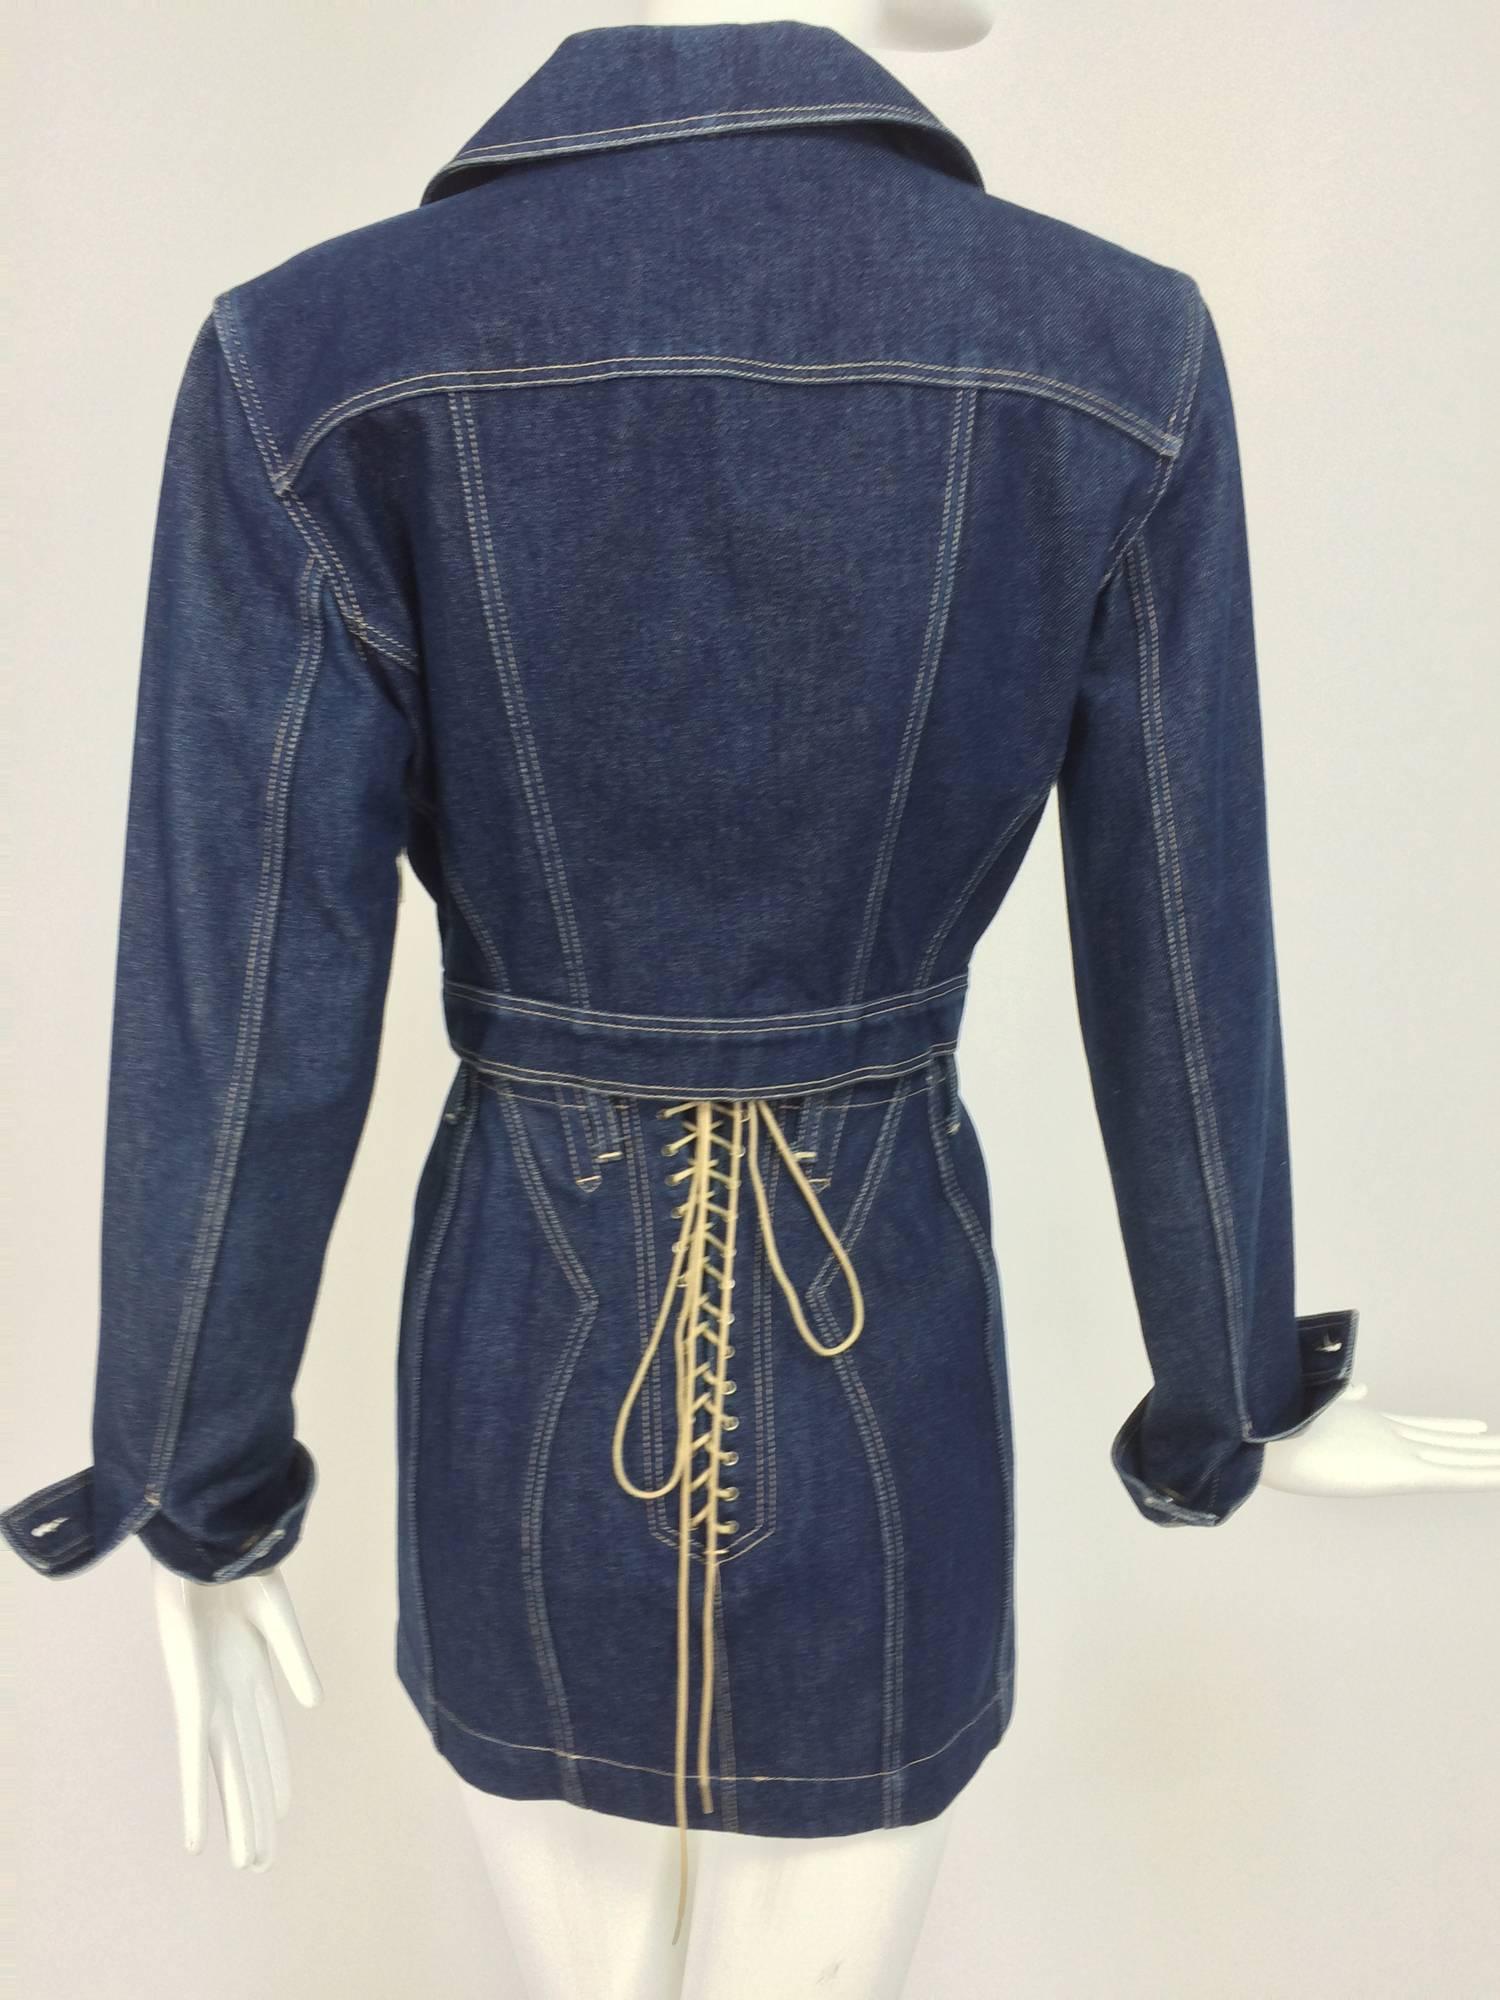 Azzedine Alaia denim skirt suit with lace back skirt 1980s...Retailed at Caron Cherry in Miami the shop only carried cutting edge 80s designers back in the day...Double breasted jacket with a cropped pea coat feel, nautical...The matching skirt